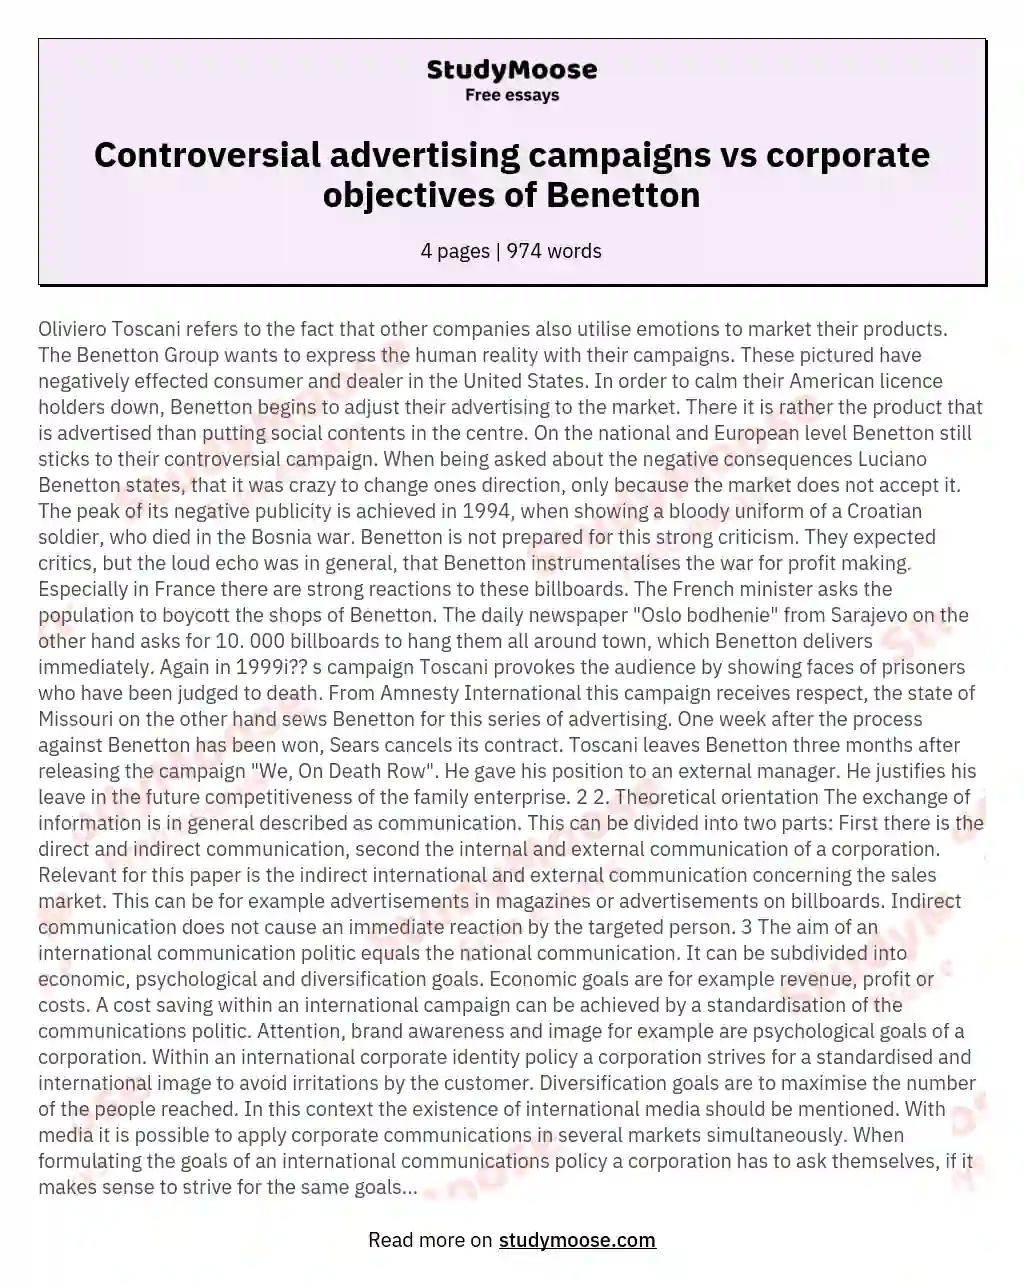 Controversial advertising campaigns vs corporate objectives of Benetton essay